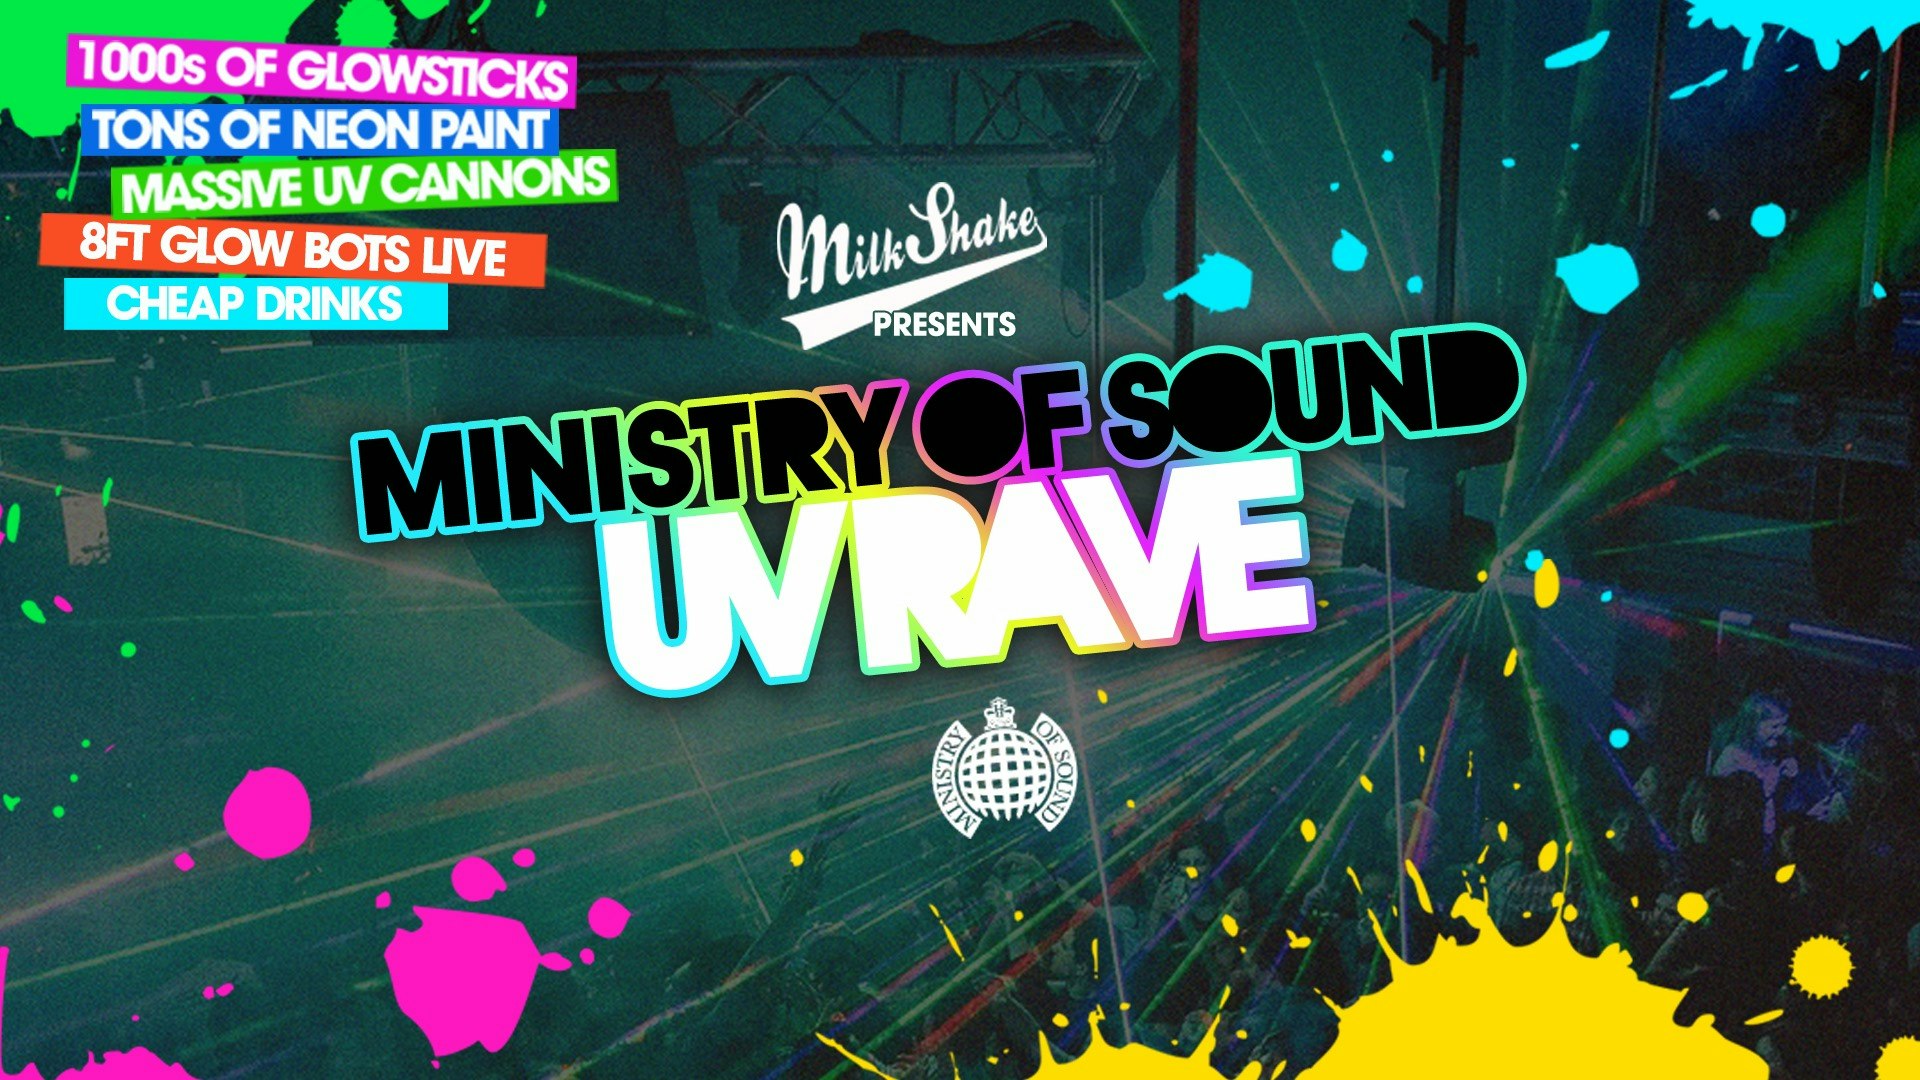 ⚠️  SOLD OUT  ⚠️   The Milkshake, Ministry of Sound UV Rave ⚡  – ⚠️  SOLD OUT  ⚠️